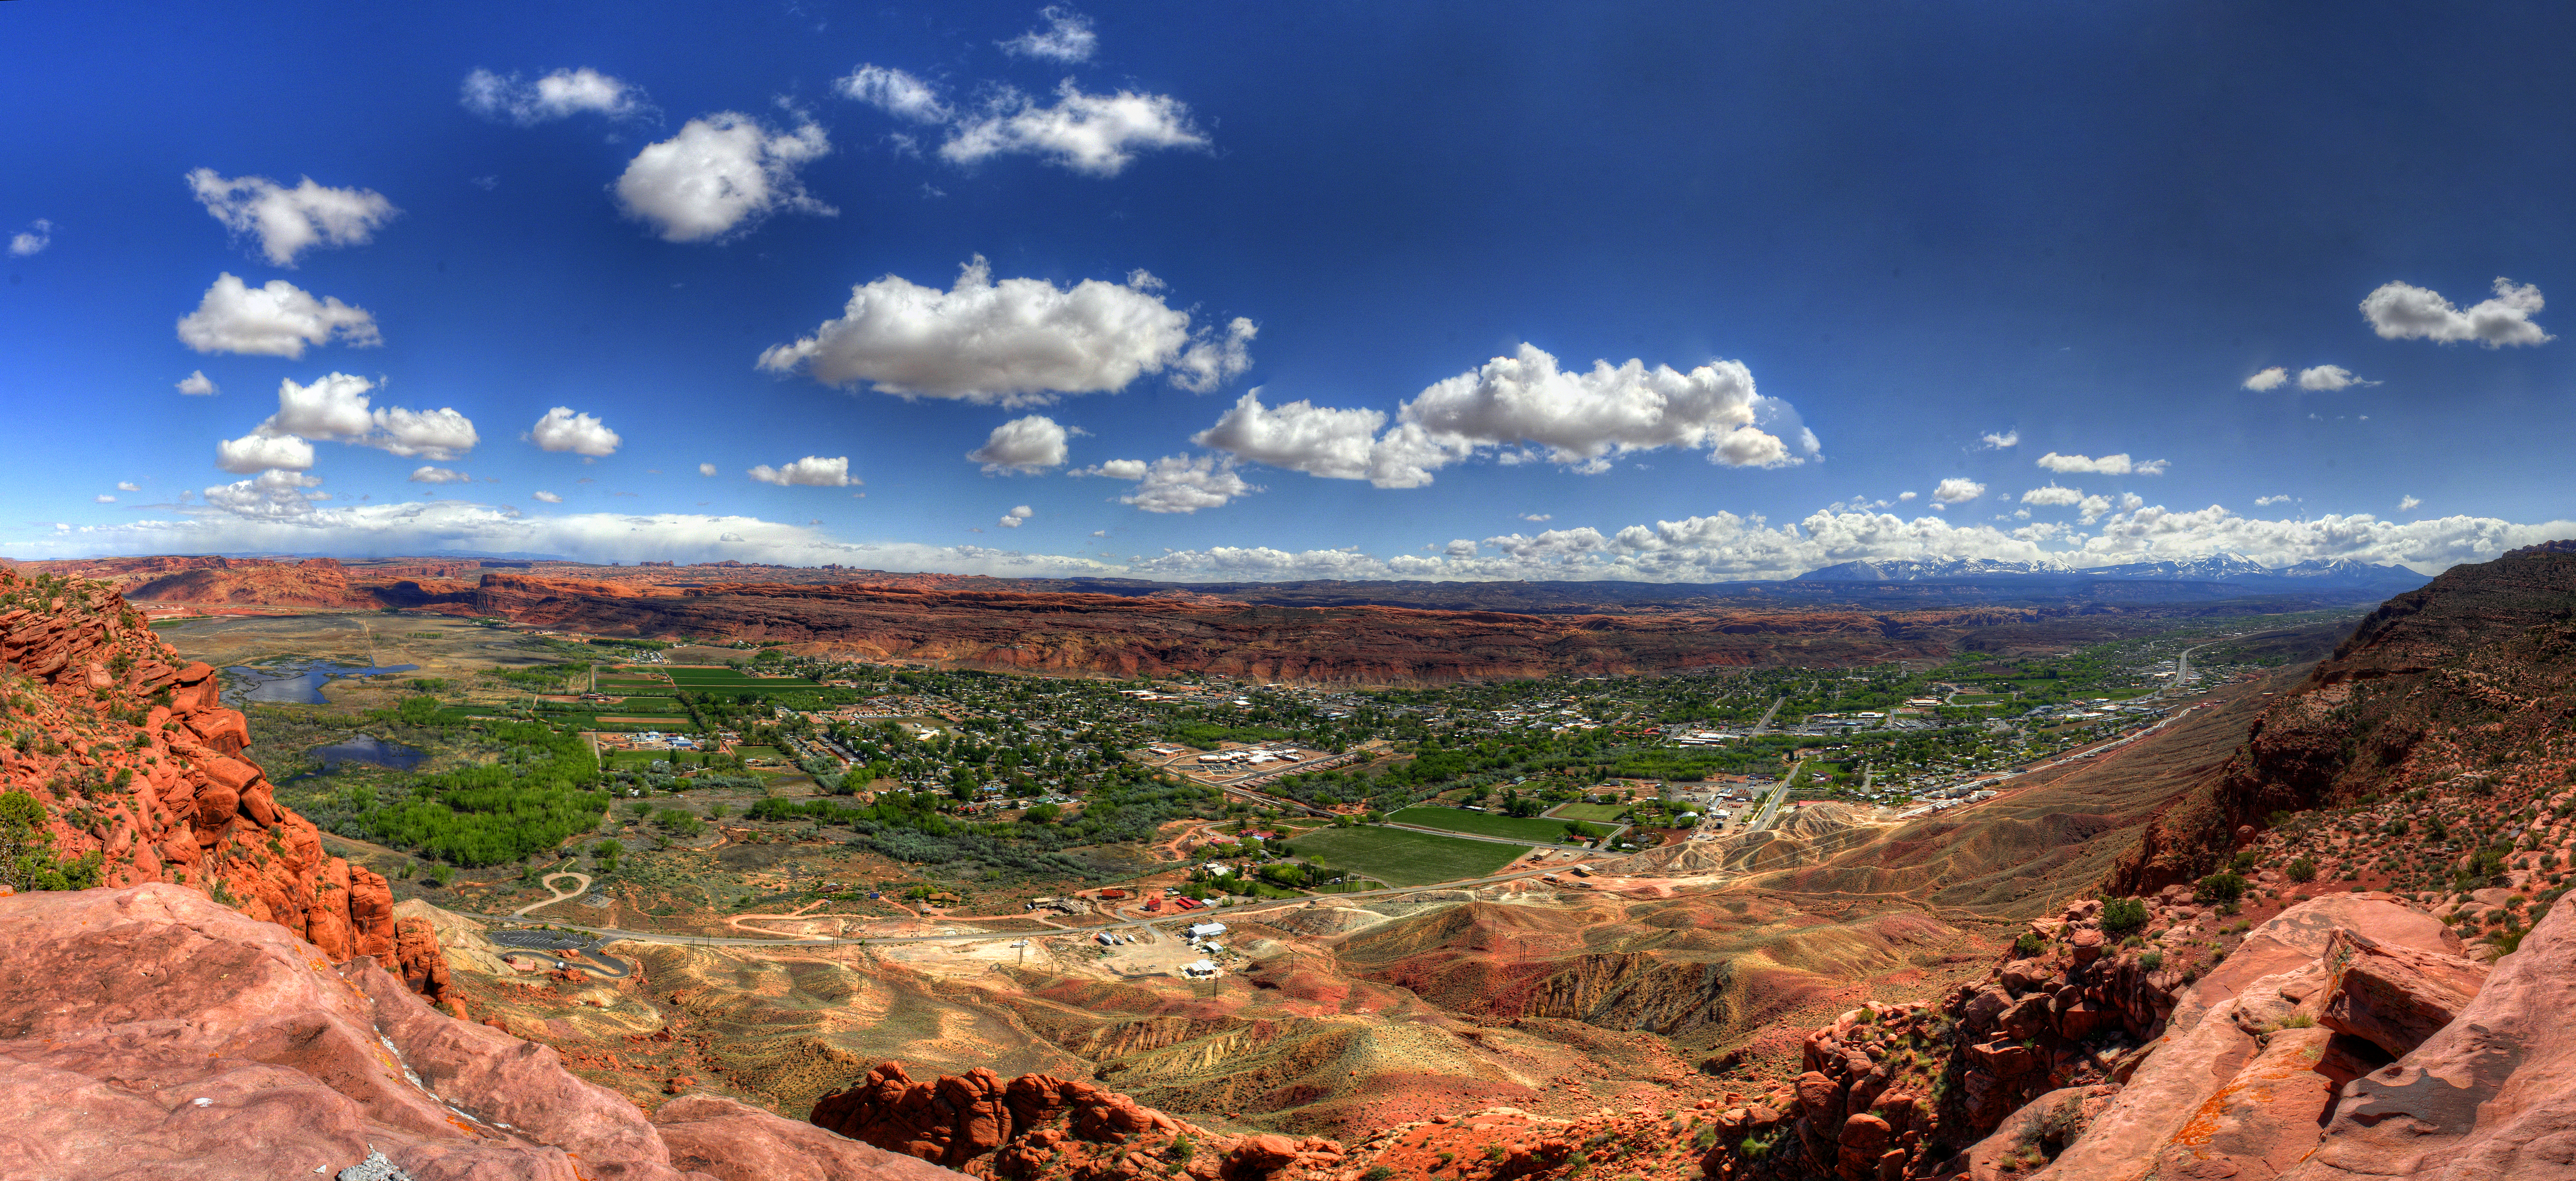 Panoramic view of the town of Moab. Bright blue sky, deep orange cliffs, and the green valley below.